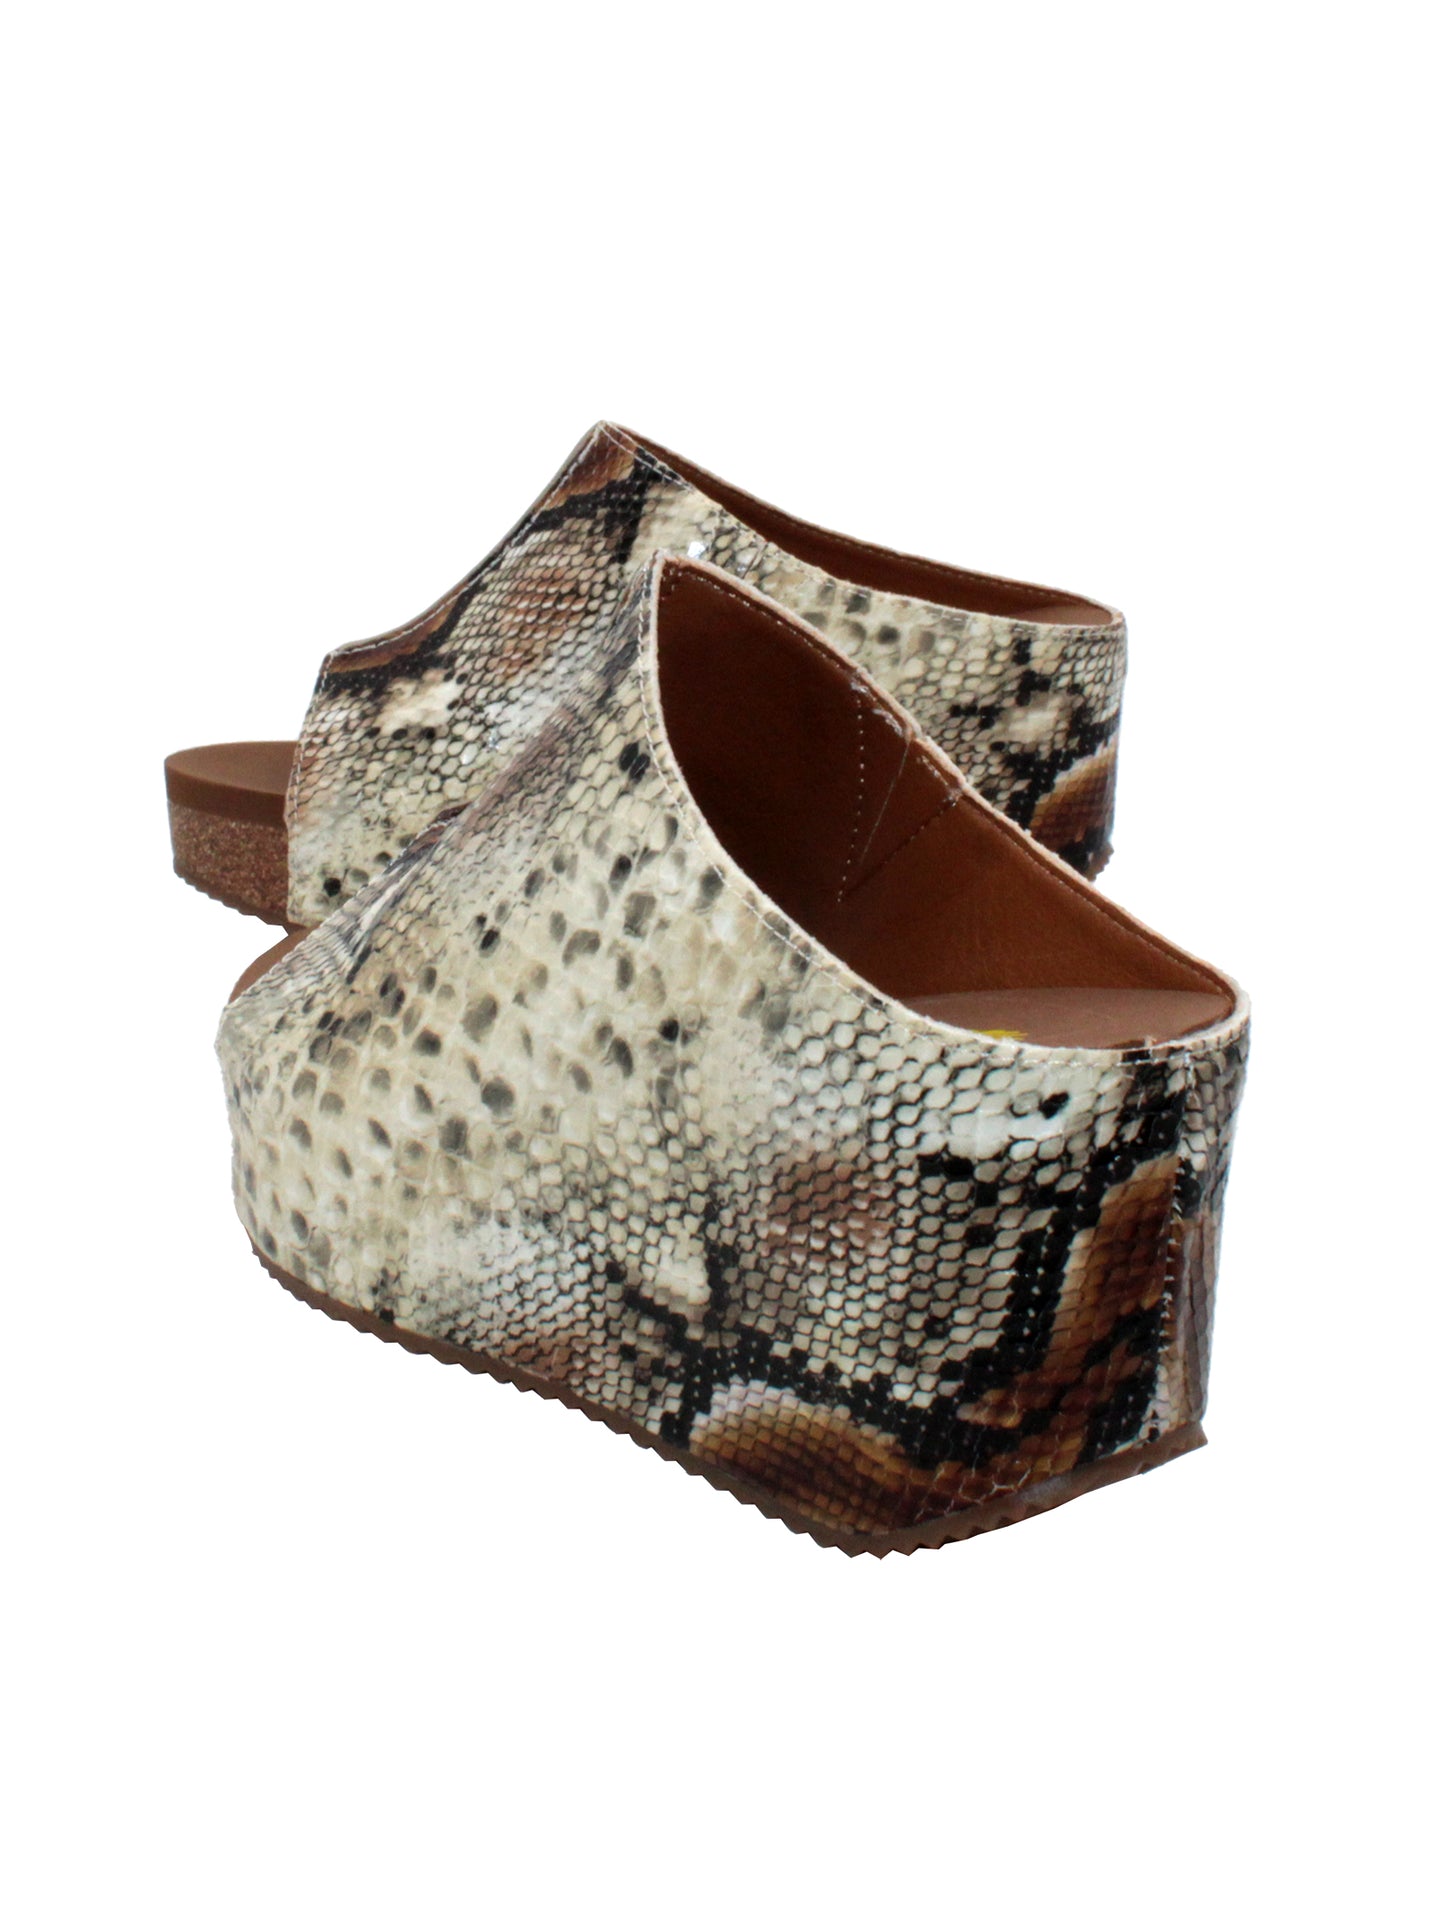 SLIP ON PEEP TOE WEDGE - Suede, hair calf, metallic tonal camo, faux snake upper with butted center seam and inner elastic gore for perfect fit - Slip on design - Leather lining - Signature ultra comfort EVA insole - Rubber traction outsole - Approx. 0.75" platform height - Approx. 2.75" wedge heel height beige multi 4